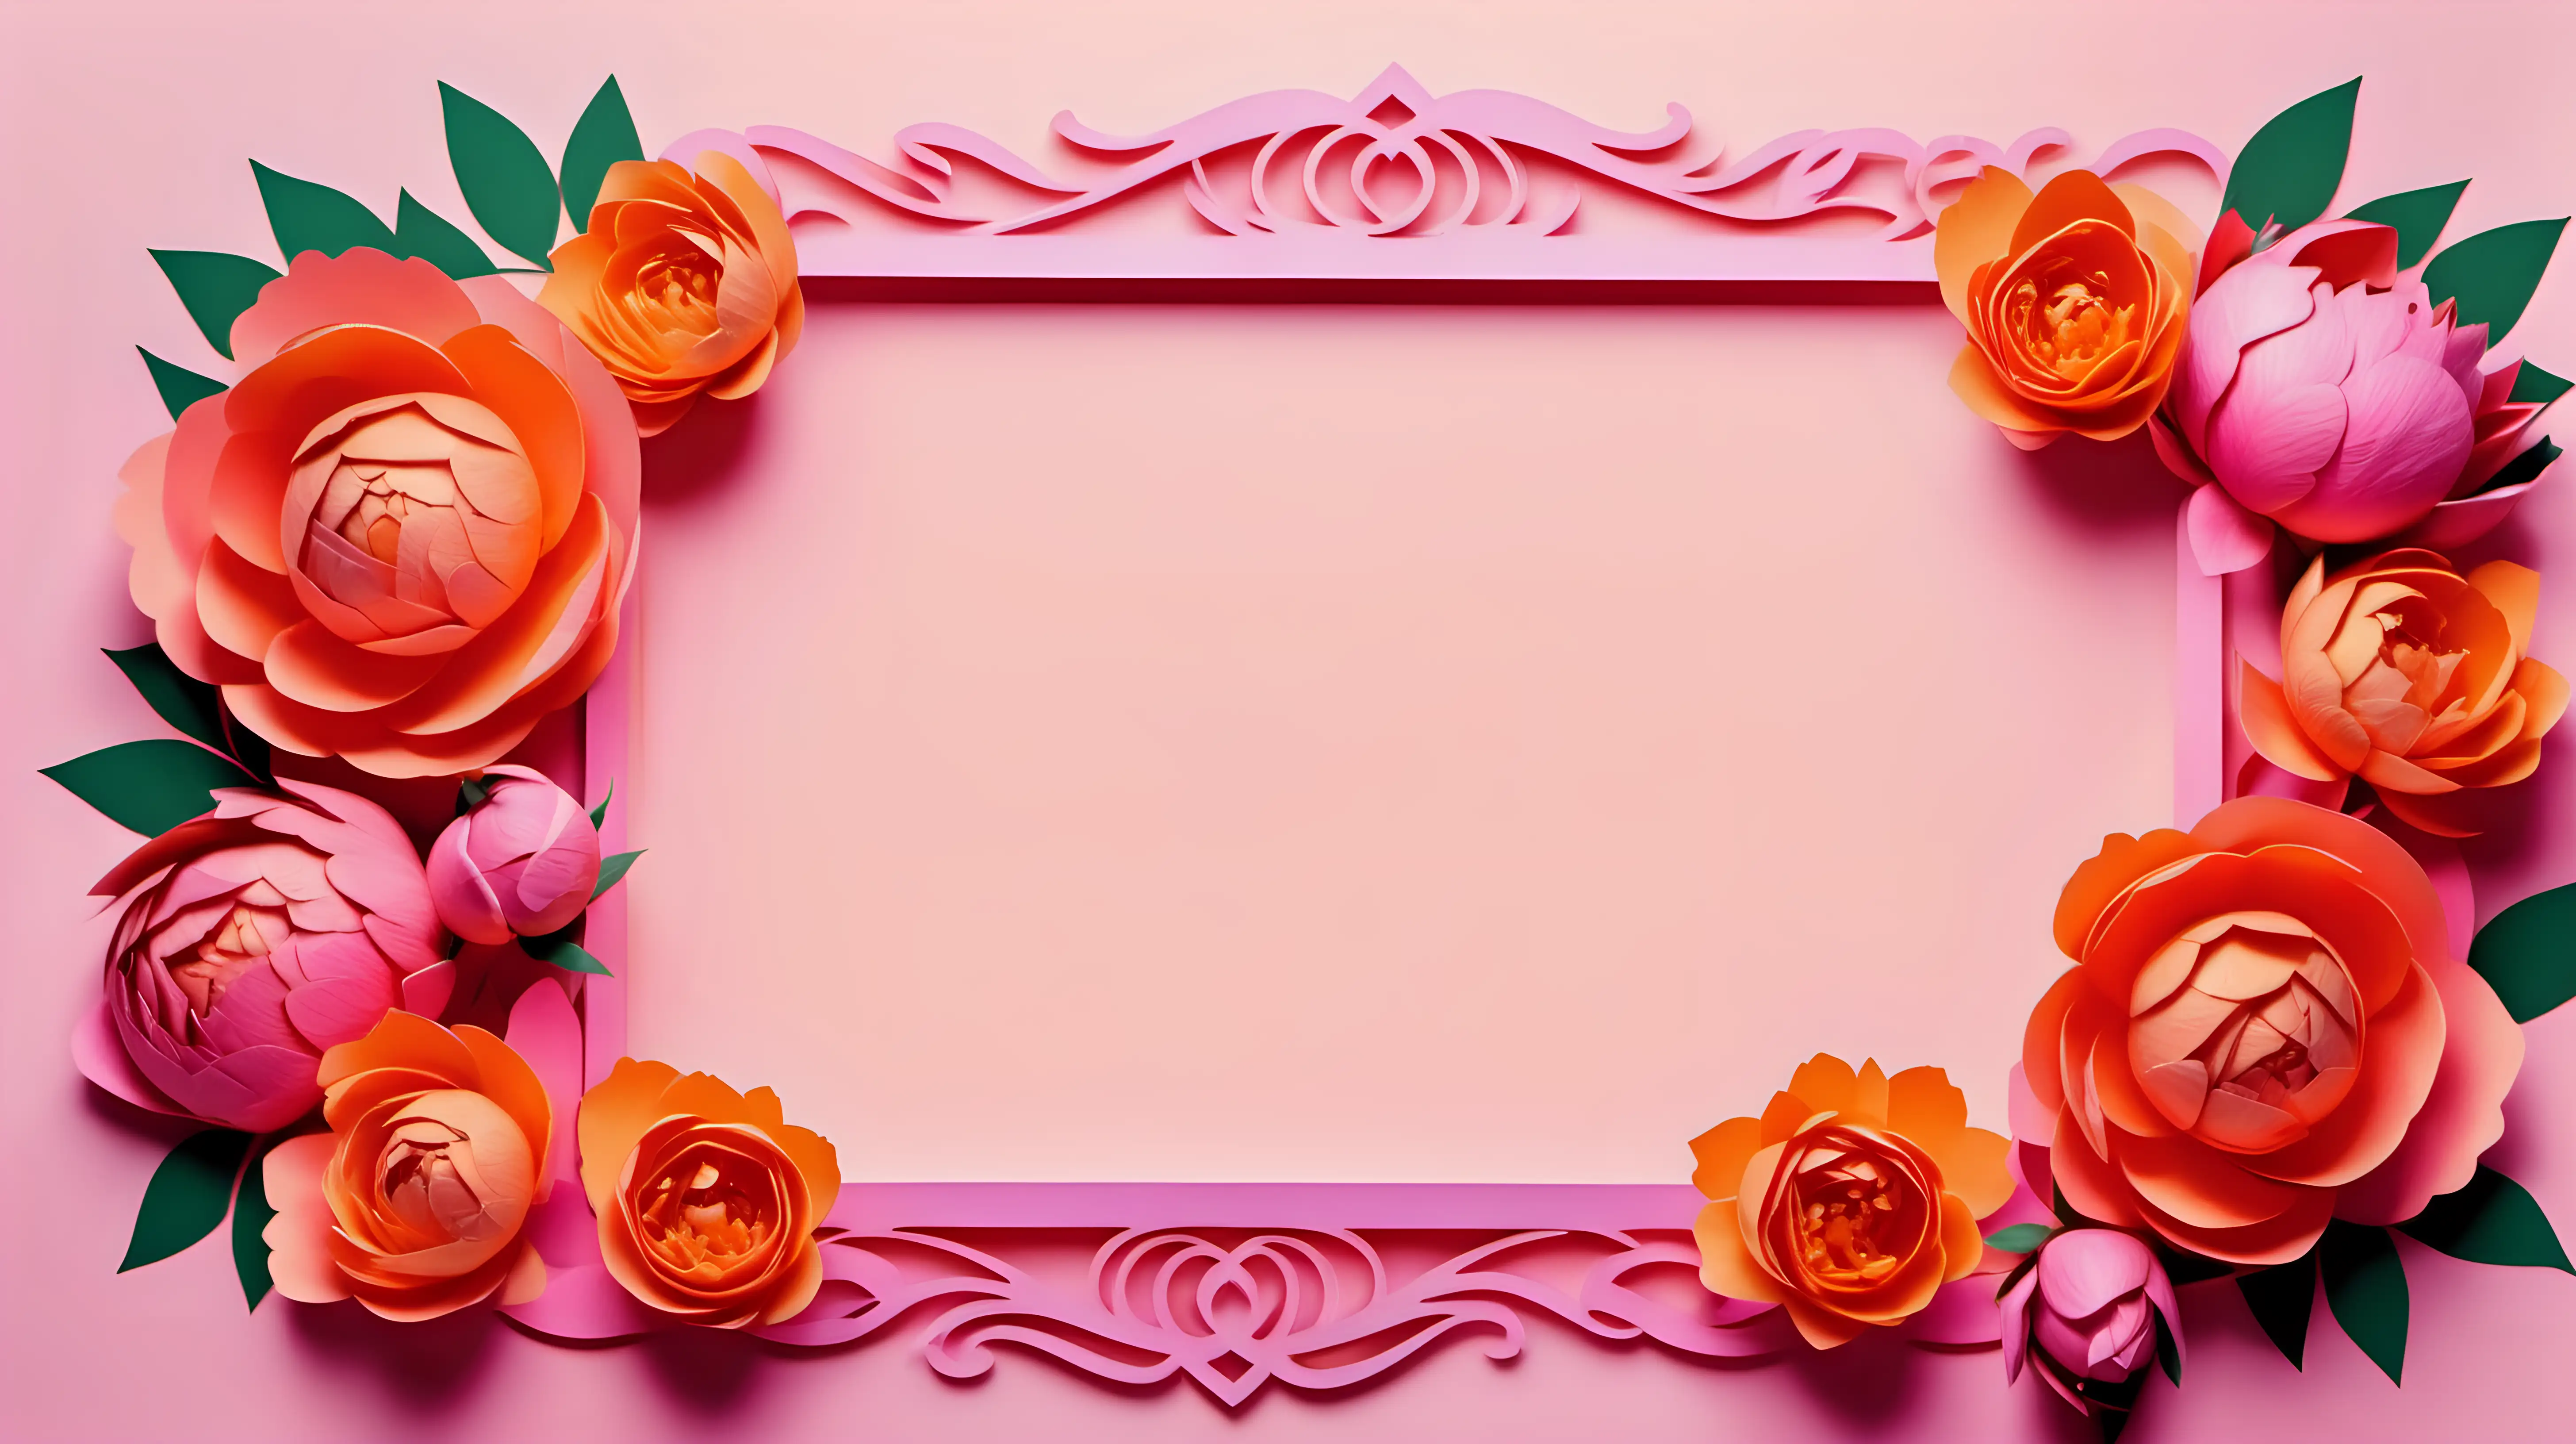 Womens Day Concept Vibrant Pink and Orange Paper Cut Floral Frame